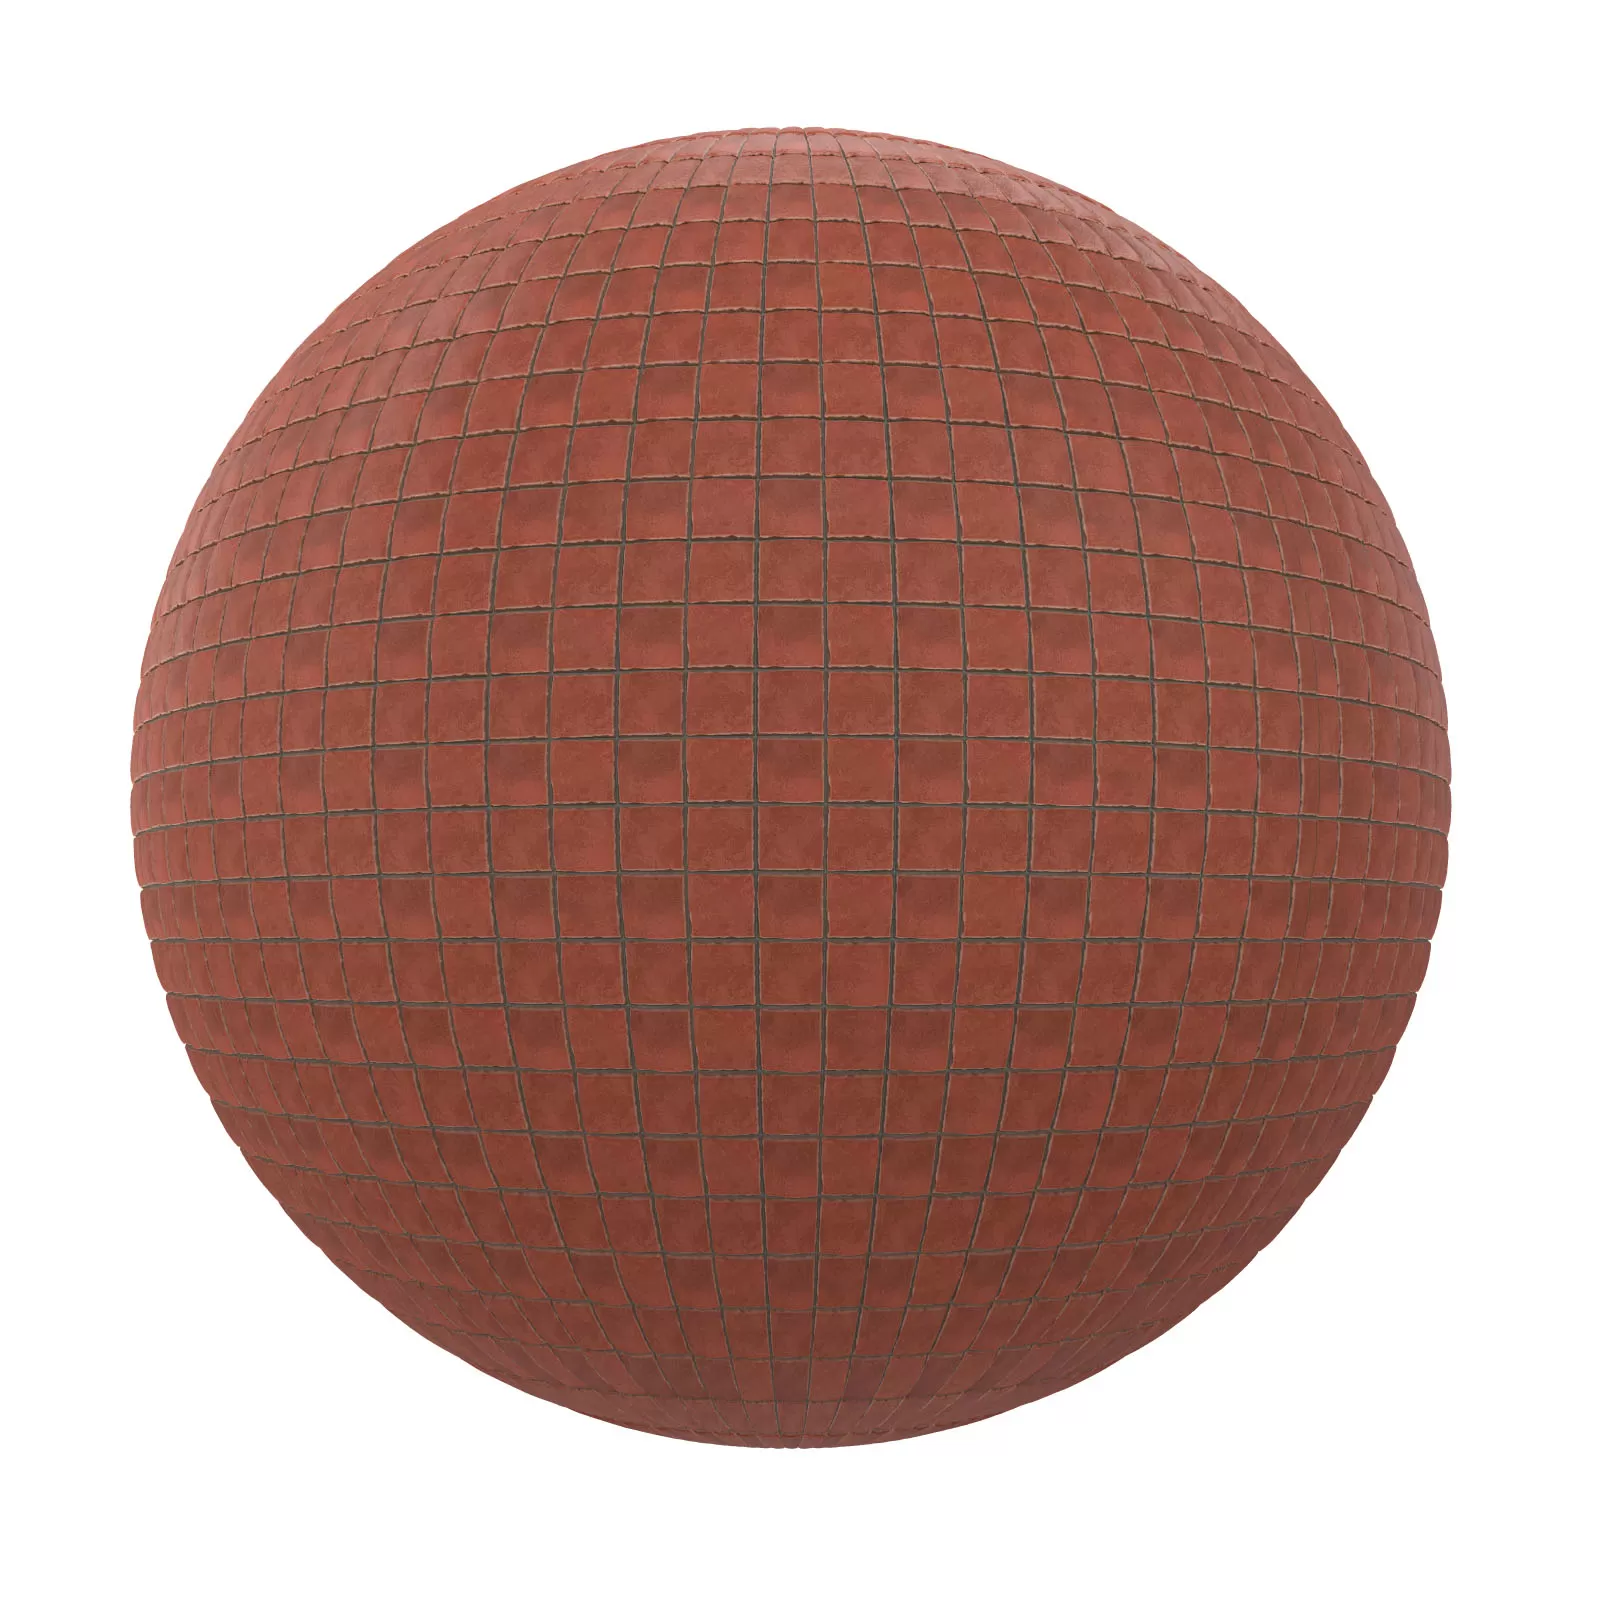 PBR CGAXIS TEXTURES – PAVEMENTS – Red Tiles Pavement